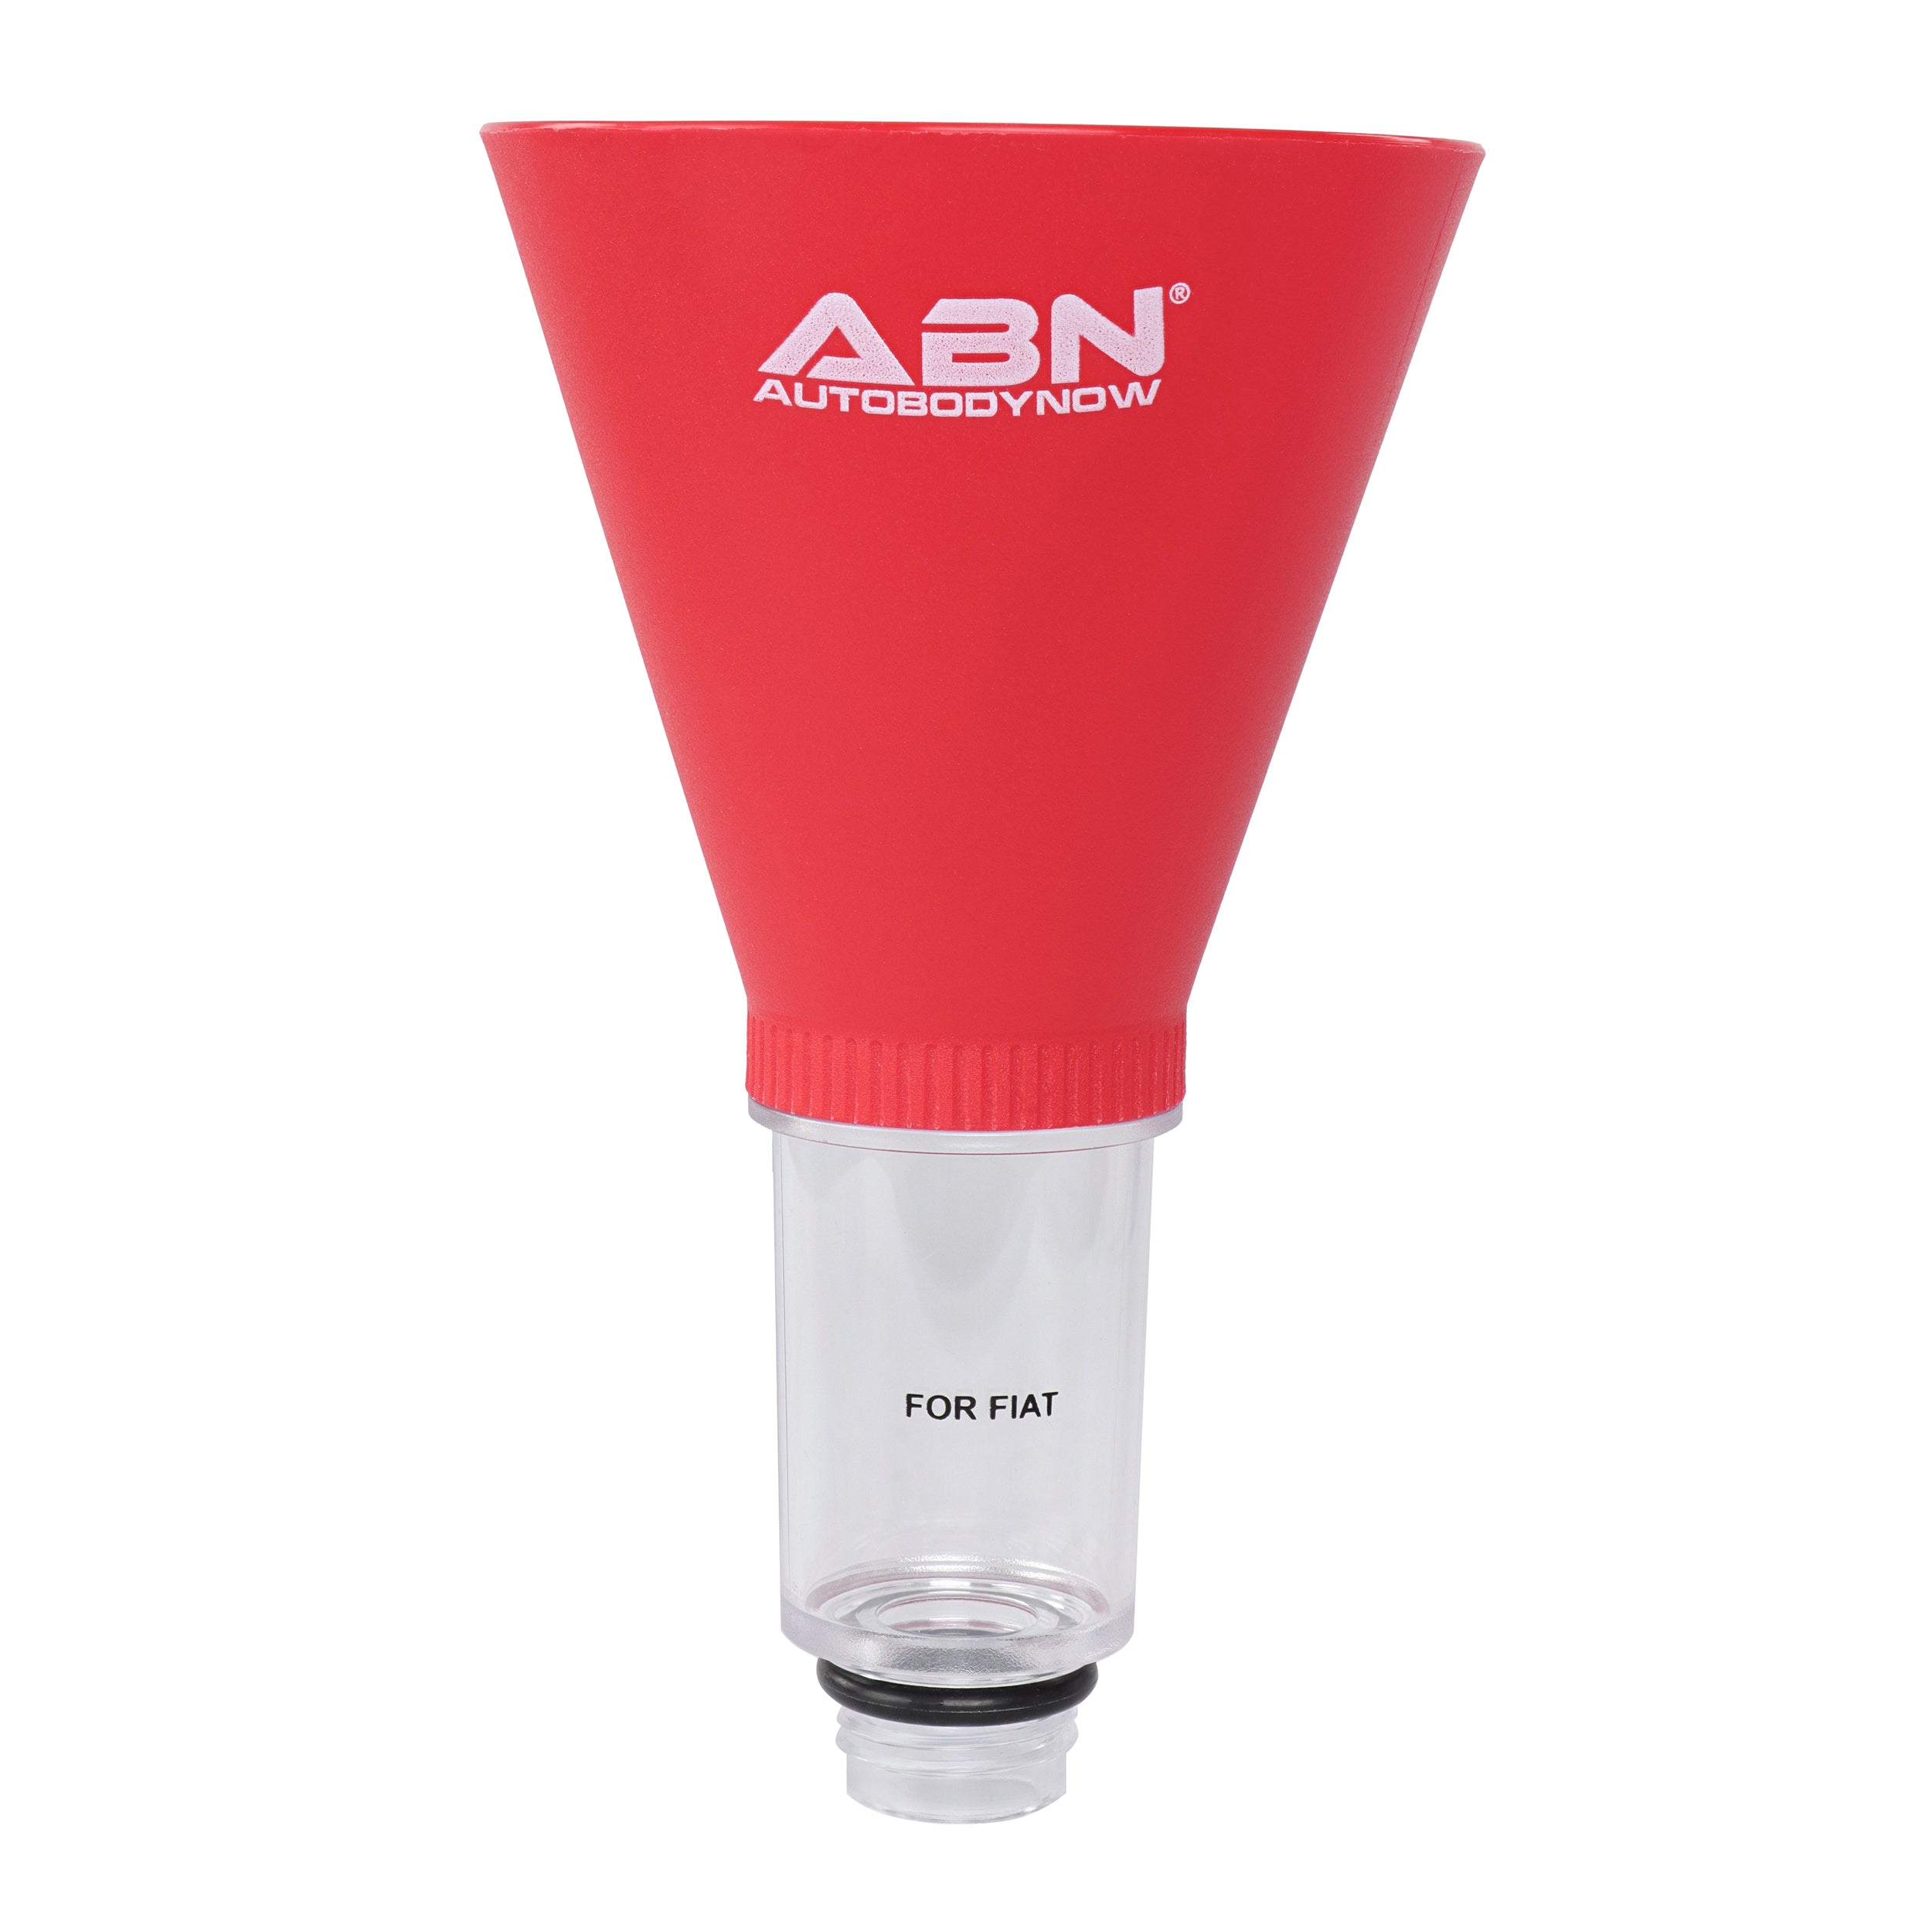 Automotive Funnel - Engine Oil Funnel Compatible with Fiat Engines